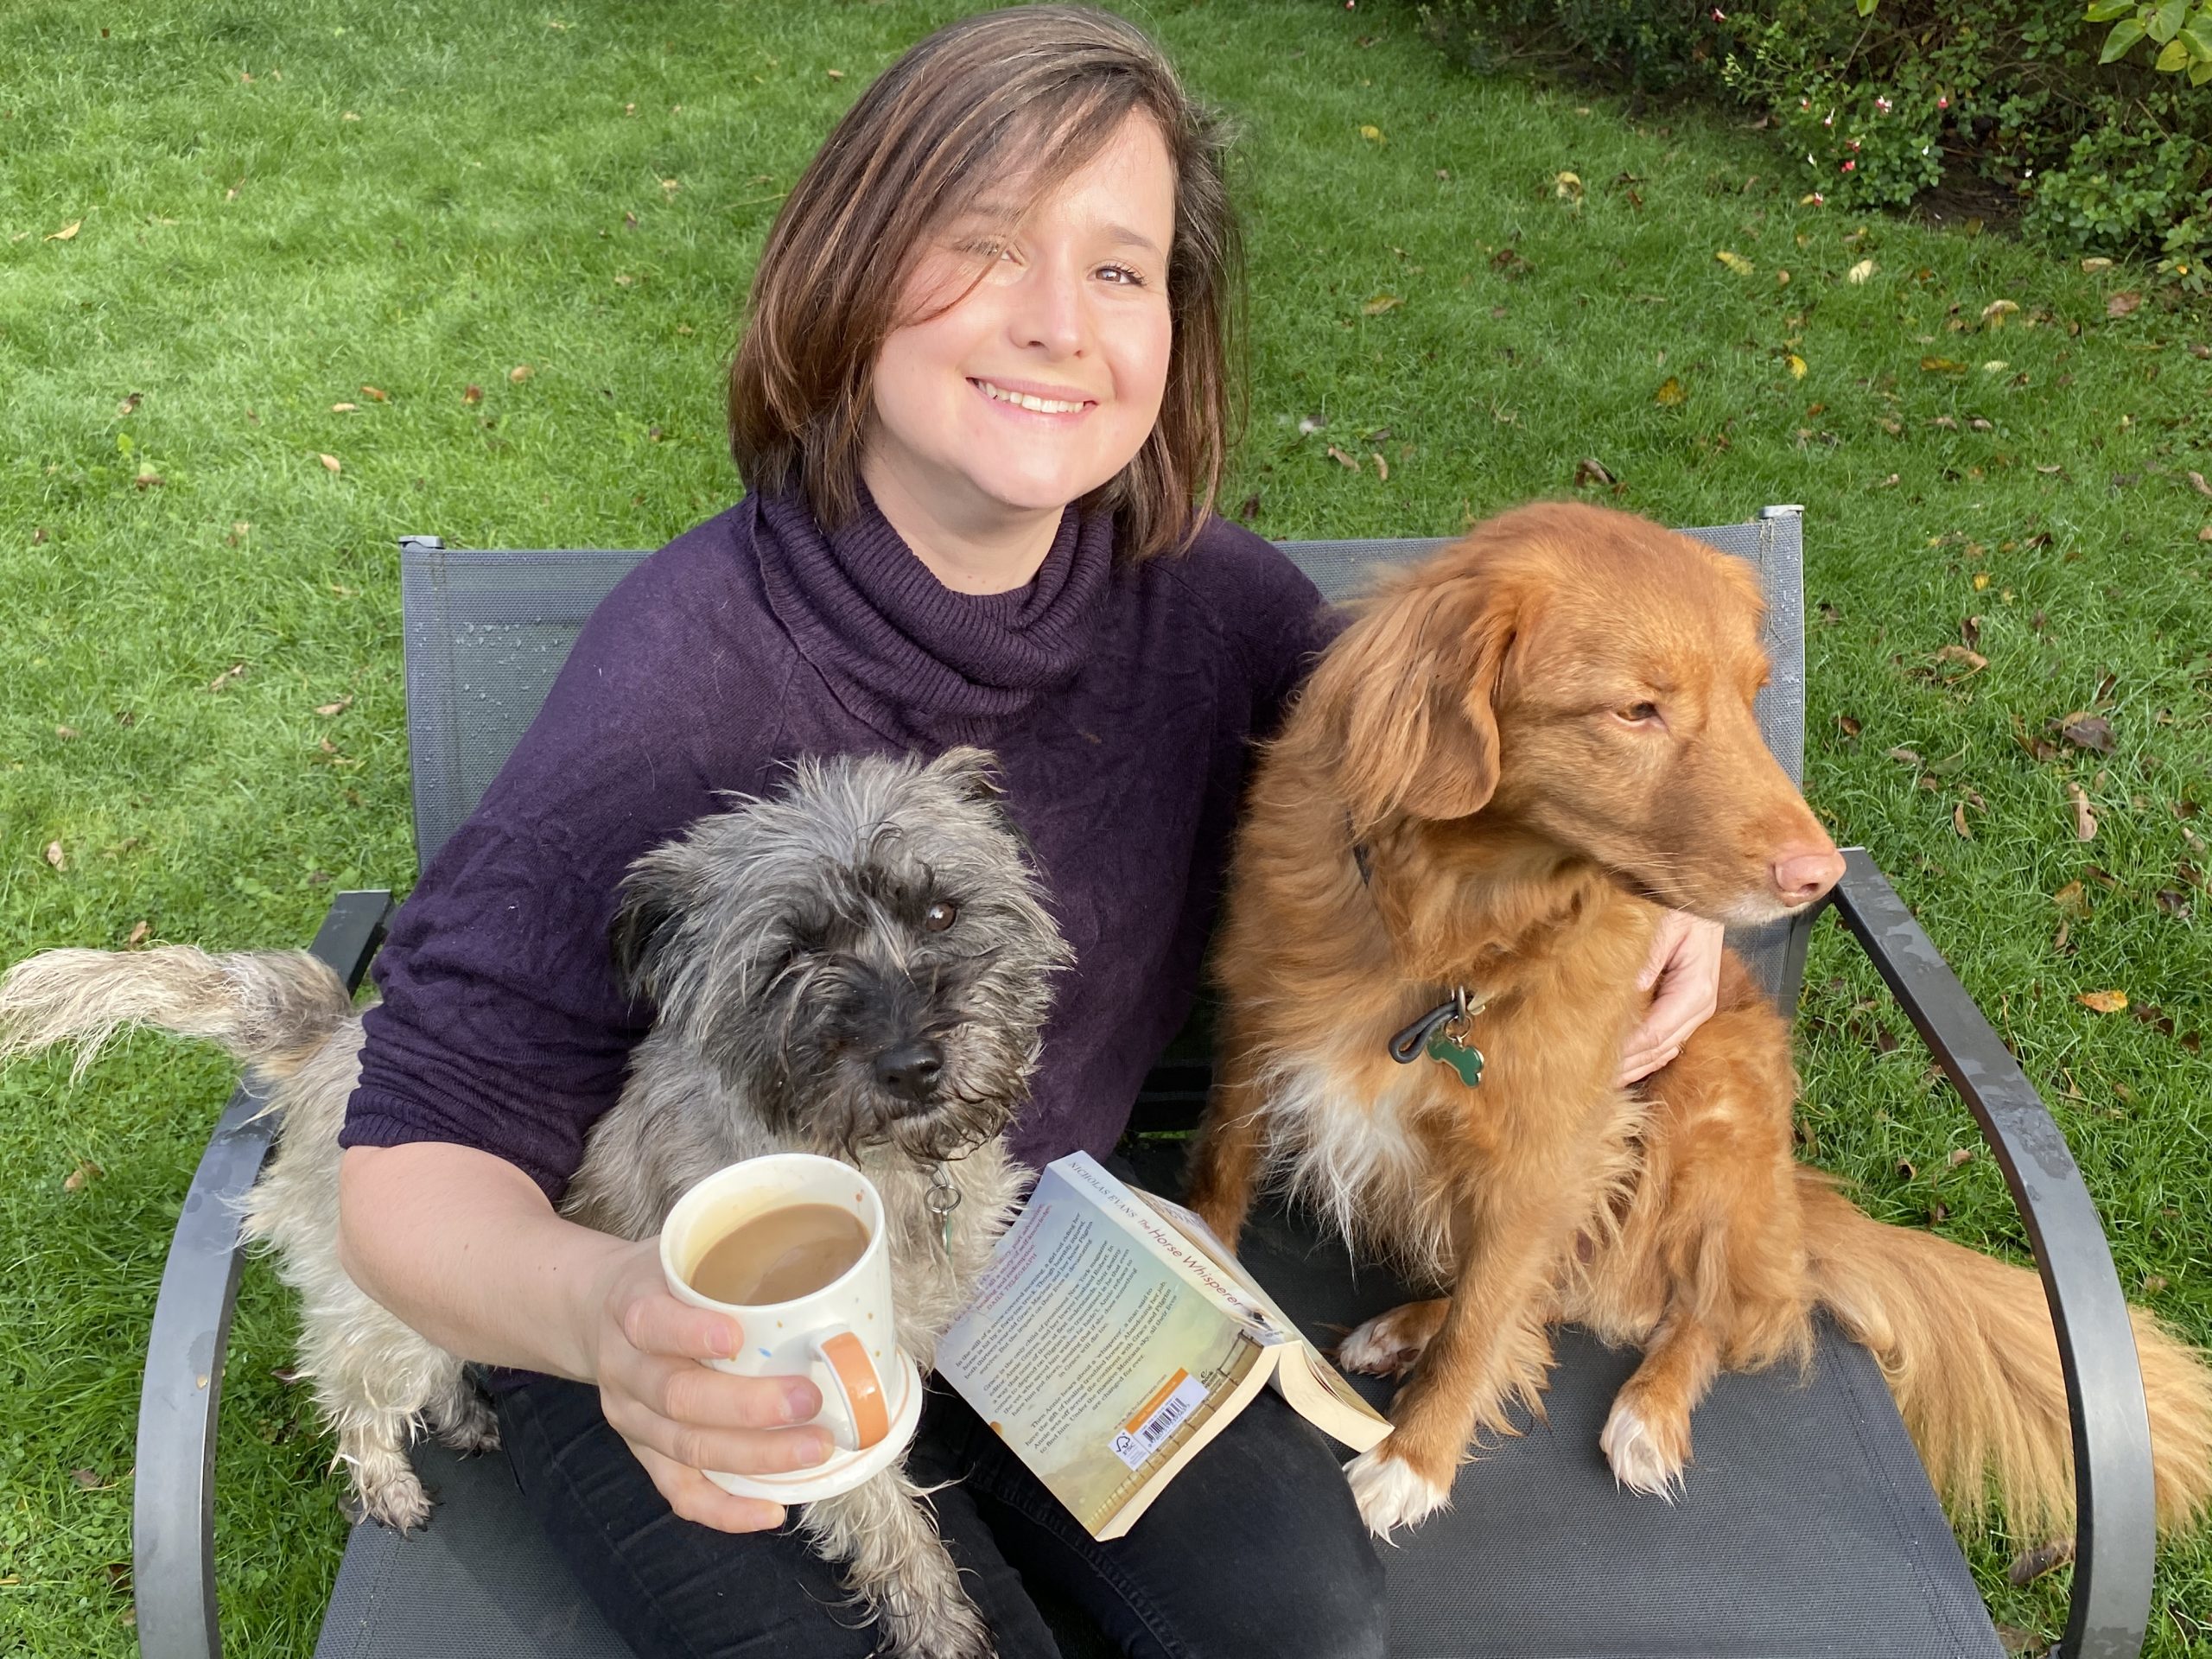 Dr Emma Rogers-Smith is a qualified vet and animal writer at The Veterinary Content Company